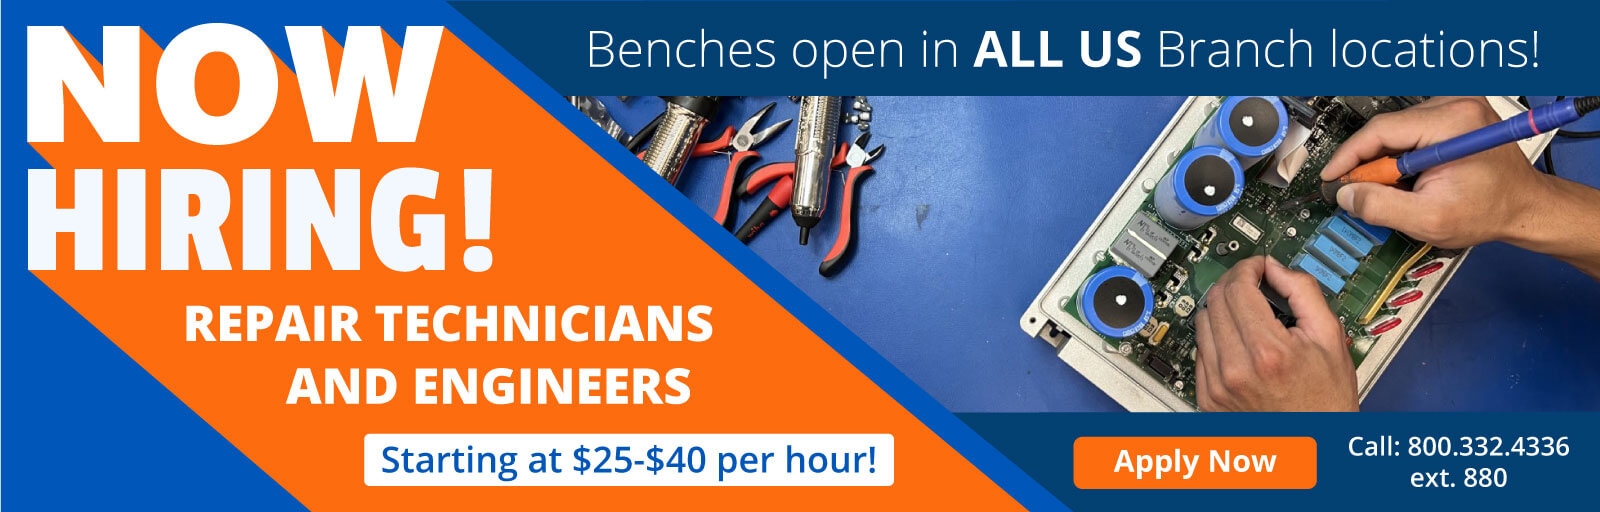 Now Hiring! Repair Technicians And Engineers